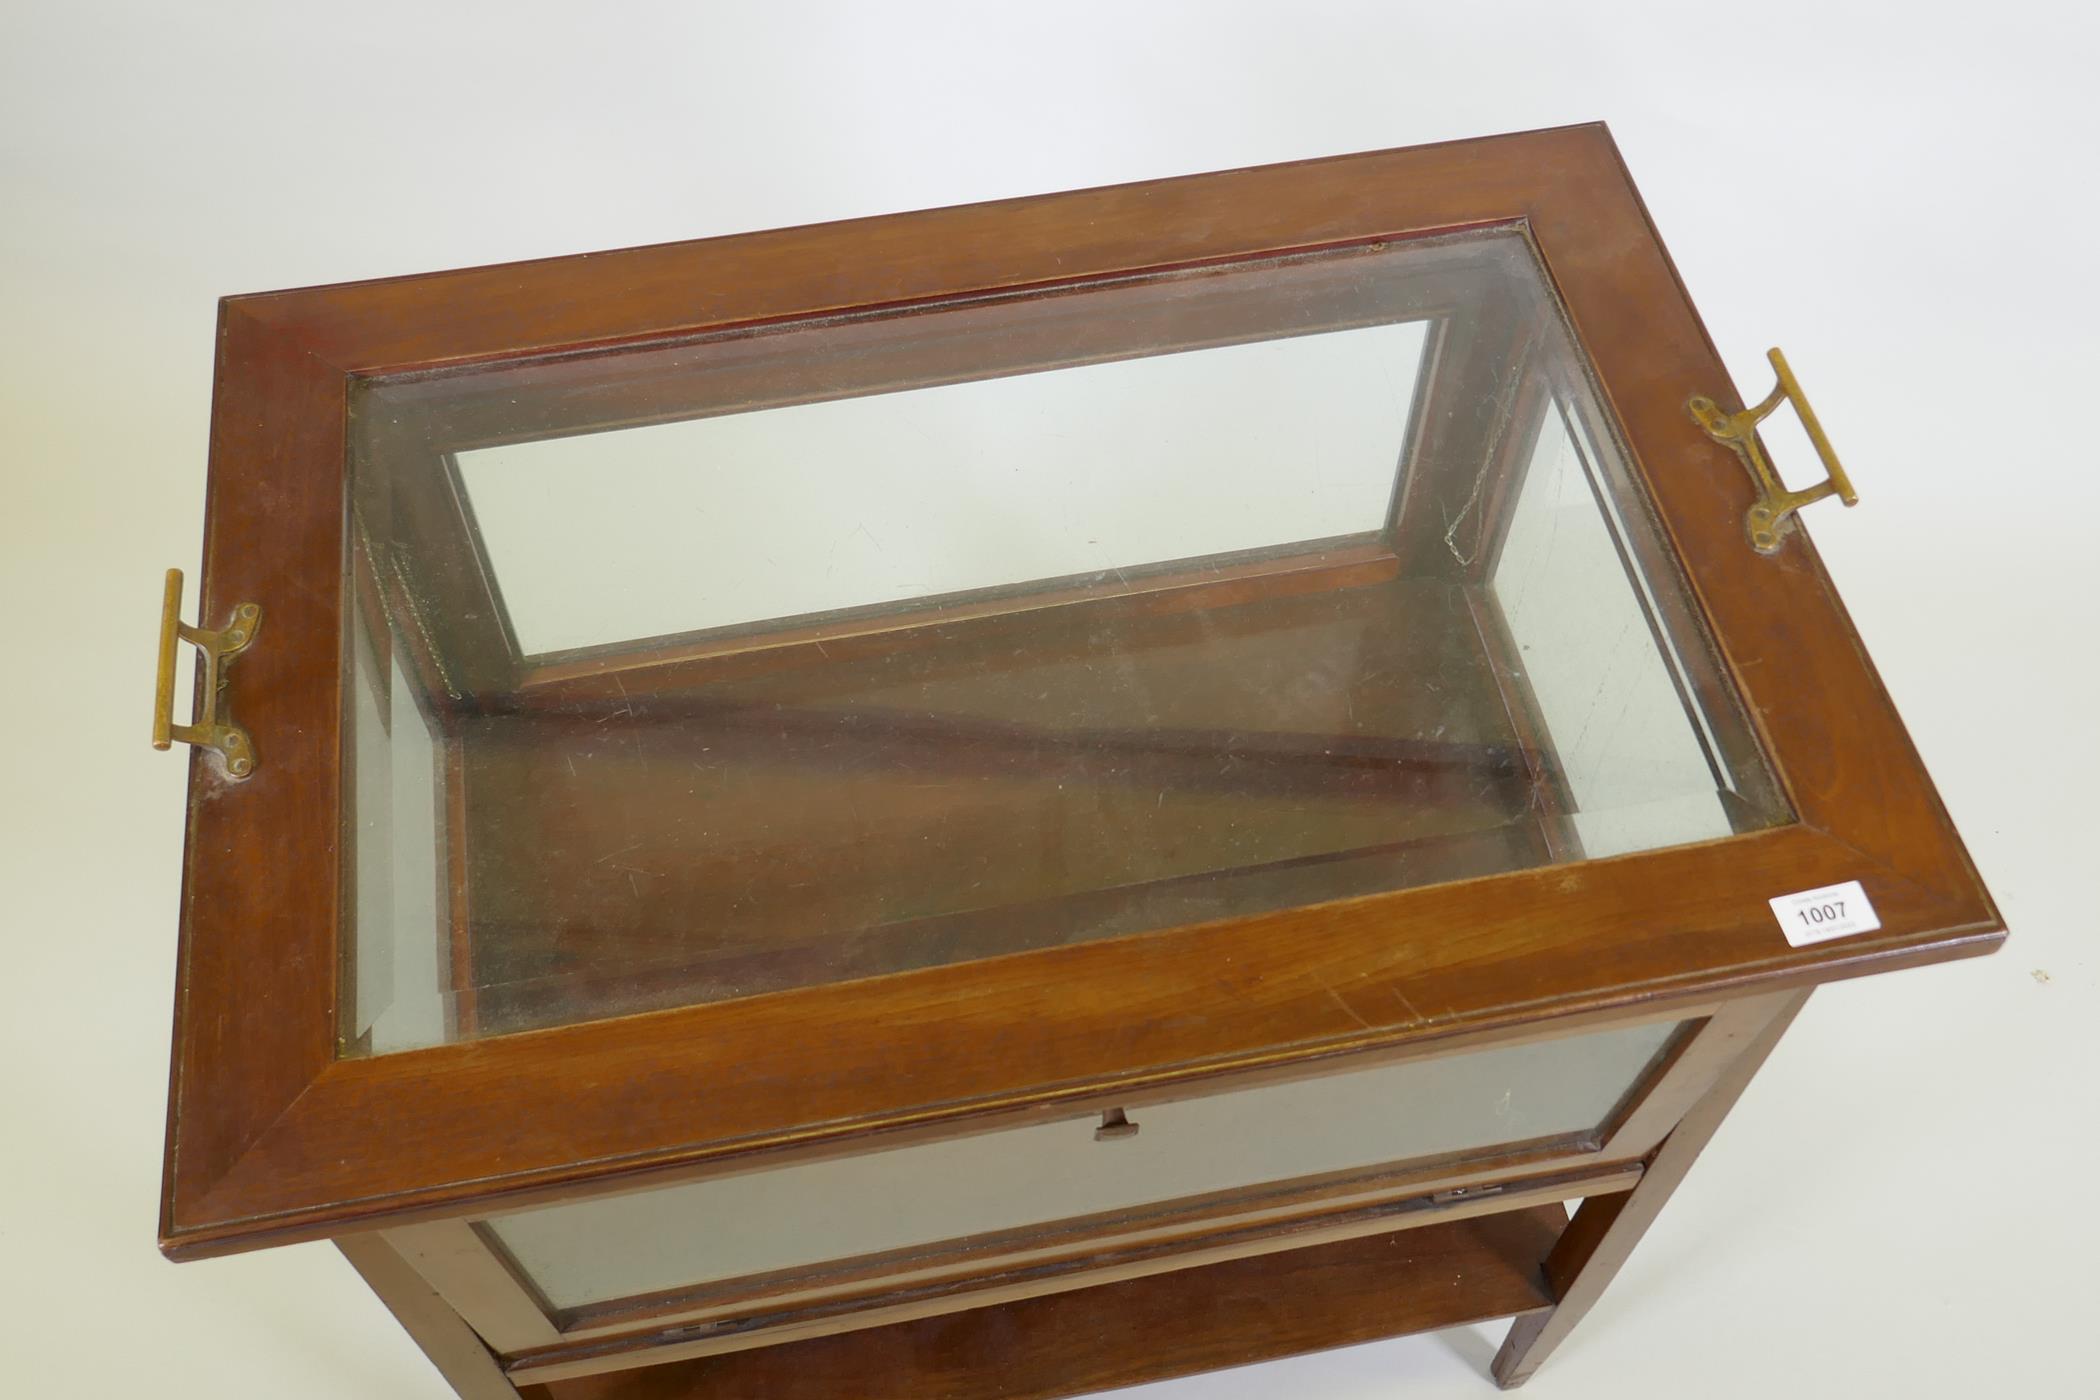 An Edwardian mahogany vitrine/display cabinet with fall front and sides and bevelled glass top, 74 x - Image 2 of 4